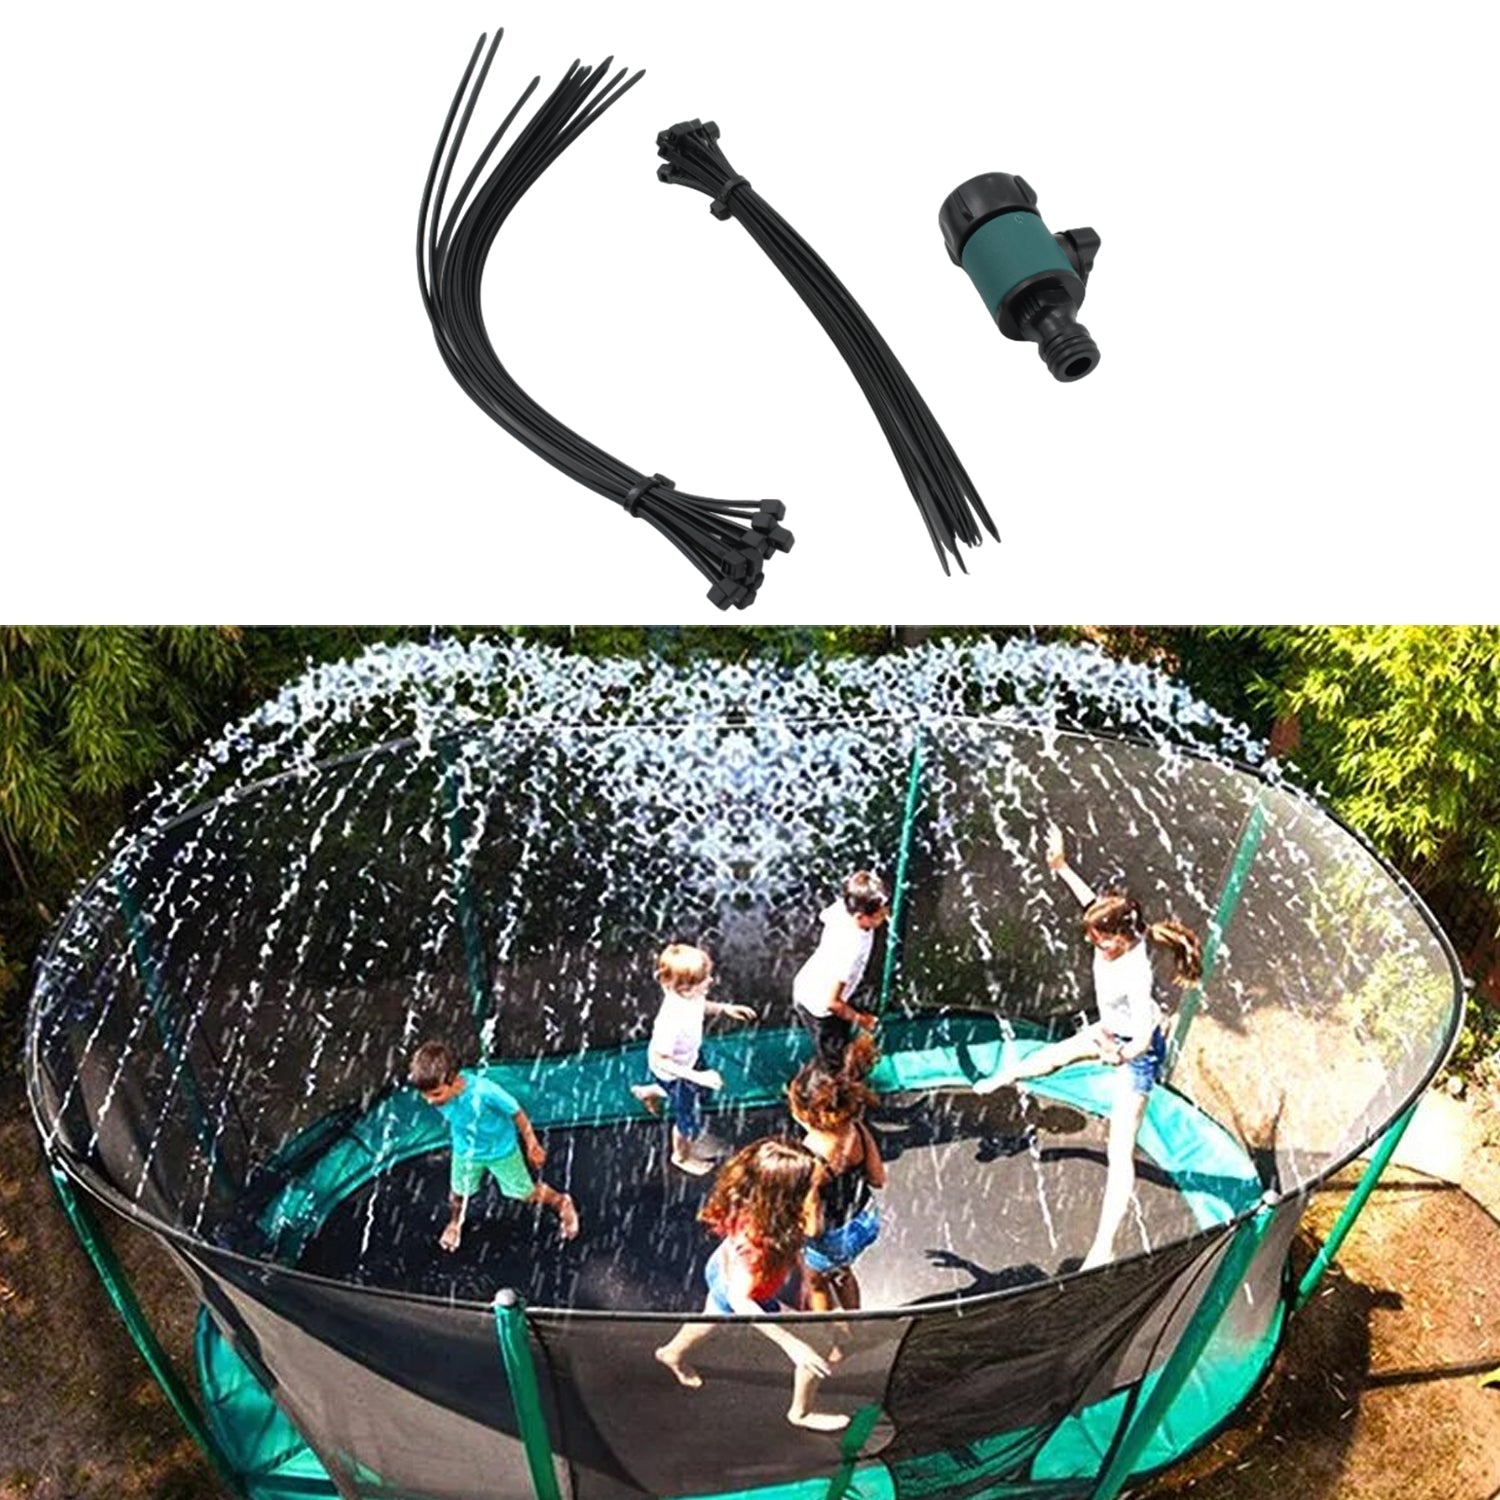 9355 Trampoline Sprinkler for Kids - Outdoor Trampoline Water Sprinkler for Kids and Adults, Trampoline Accessories Sprinkler 39ft Long for Water Play, Games, and Summer Fun in Yards (39ft)